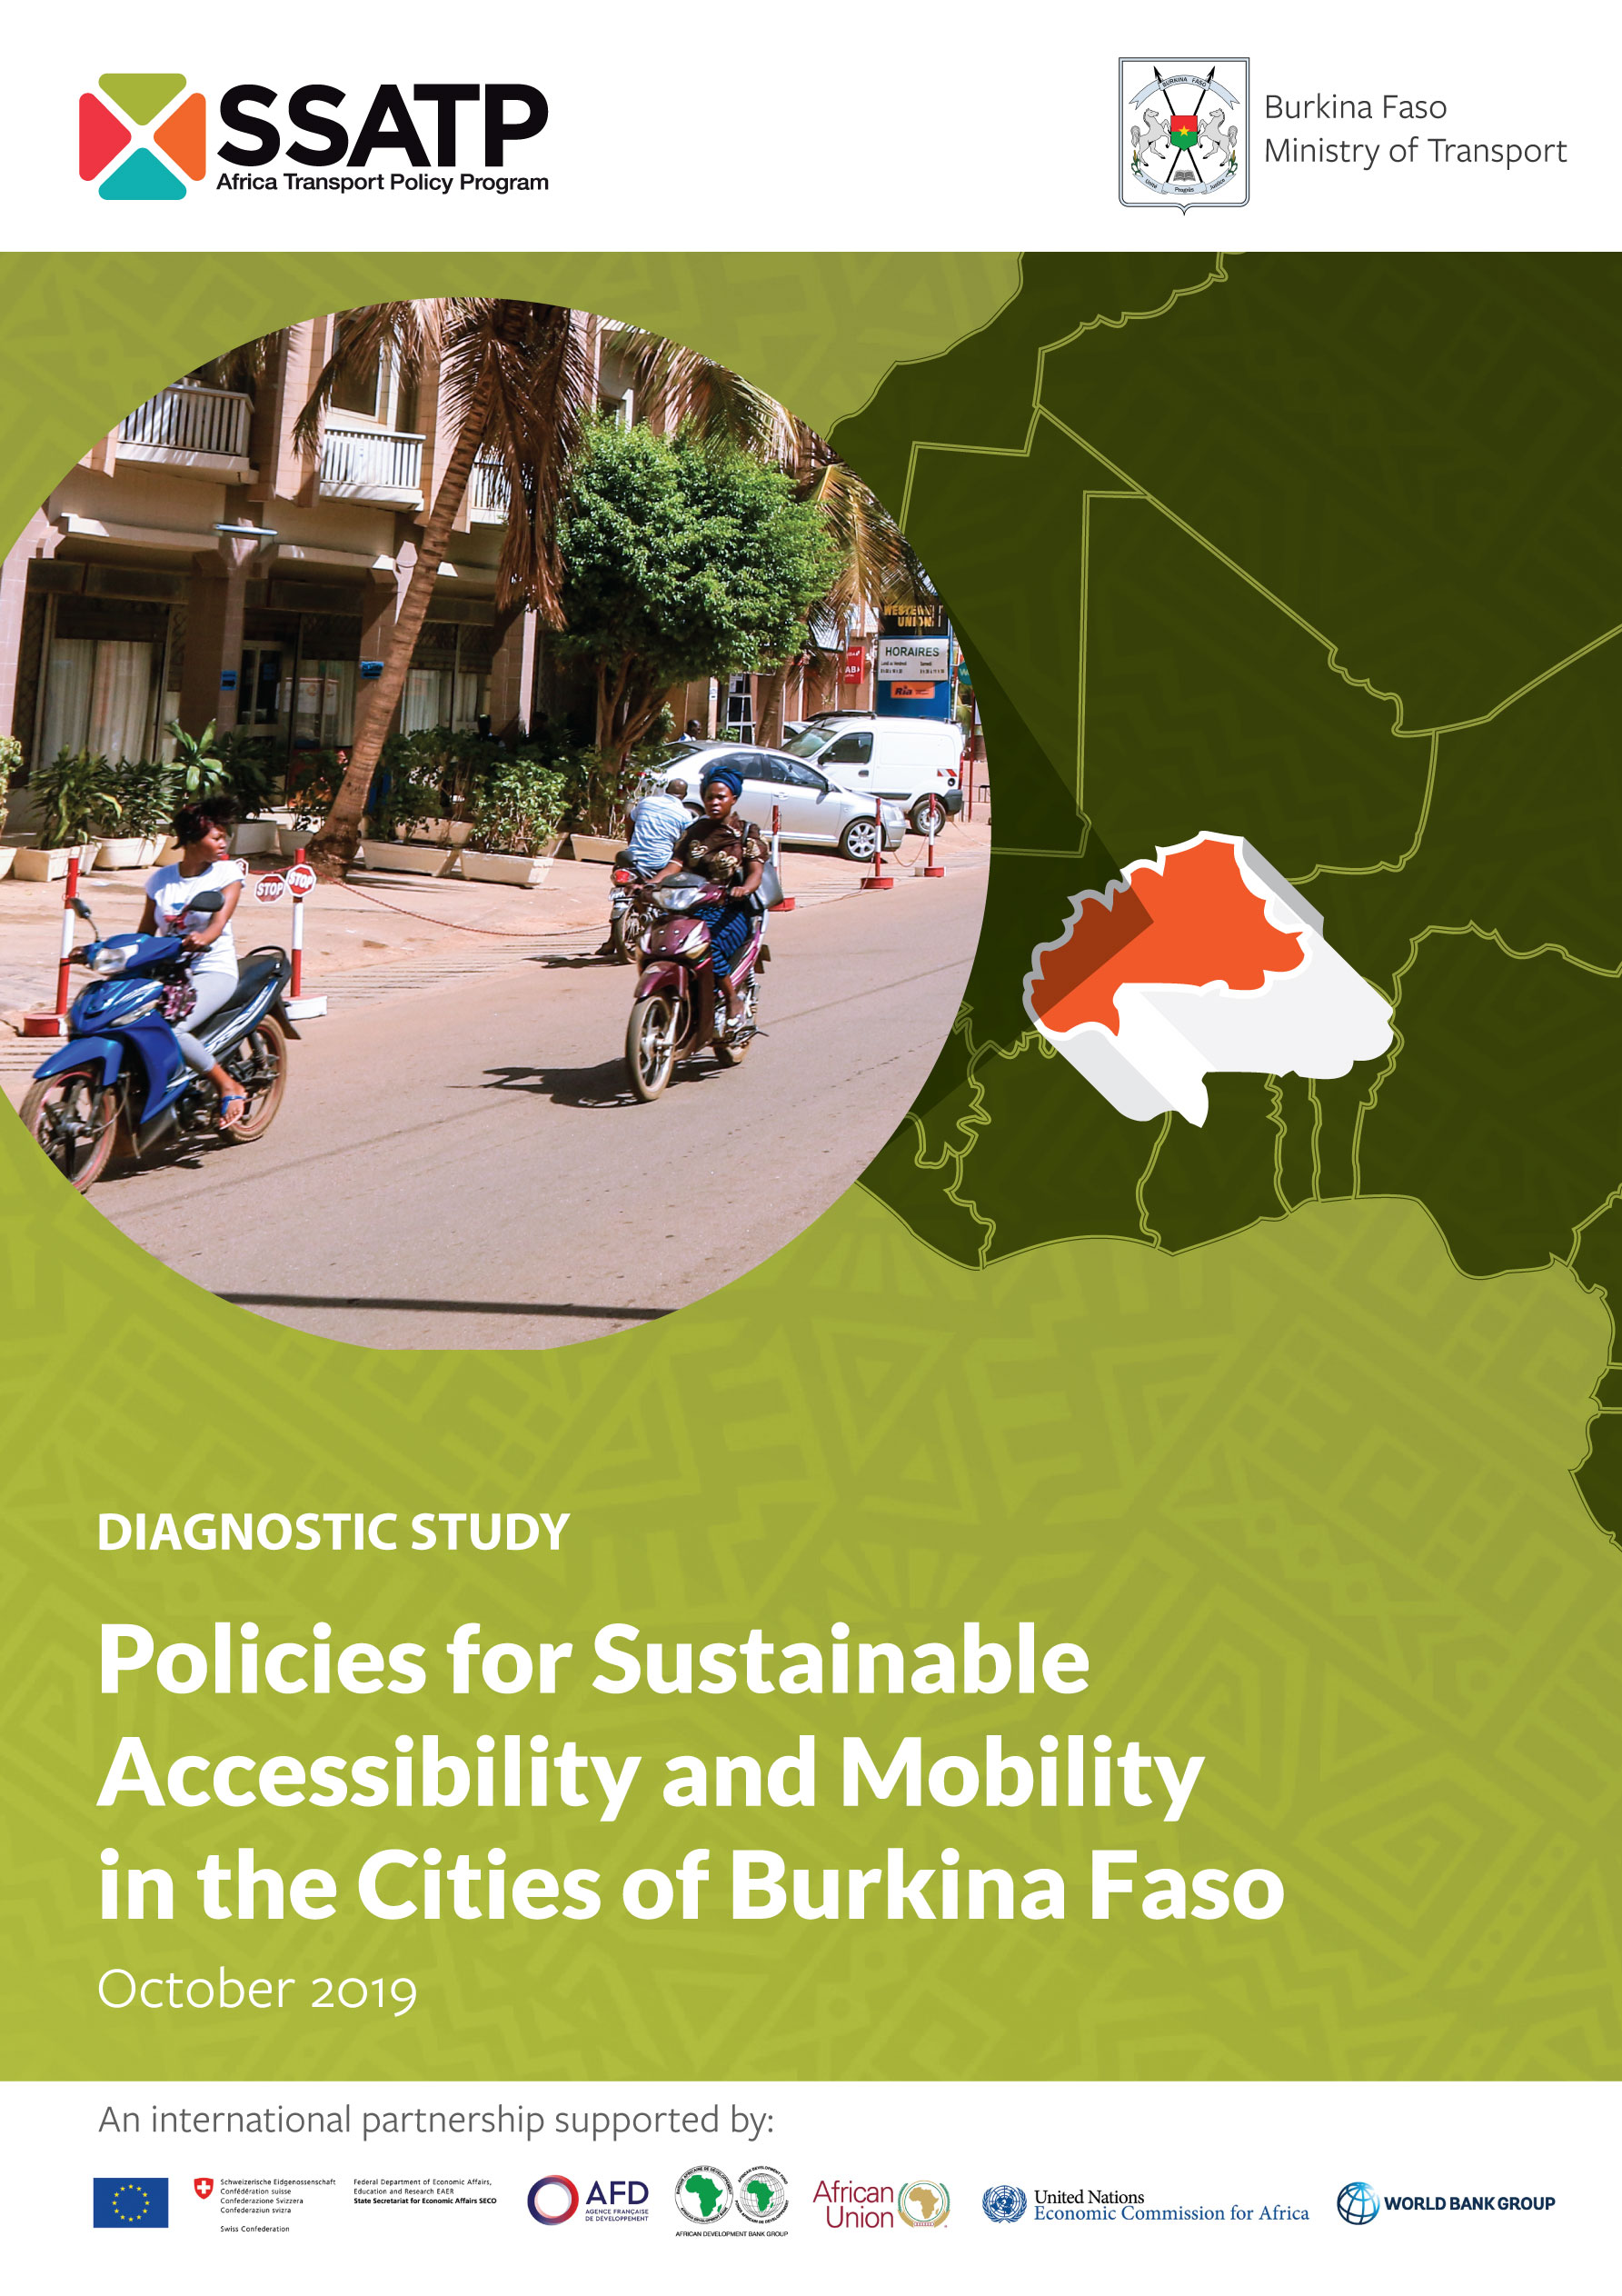 Policies for sustainable mobility and accessibility in cities of Burkina Faso - Diagnostic Study